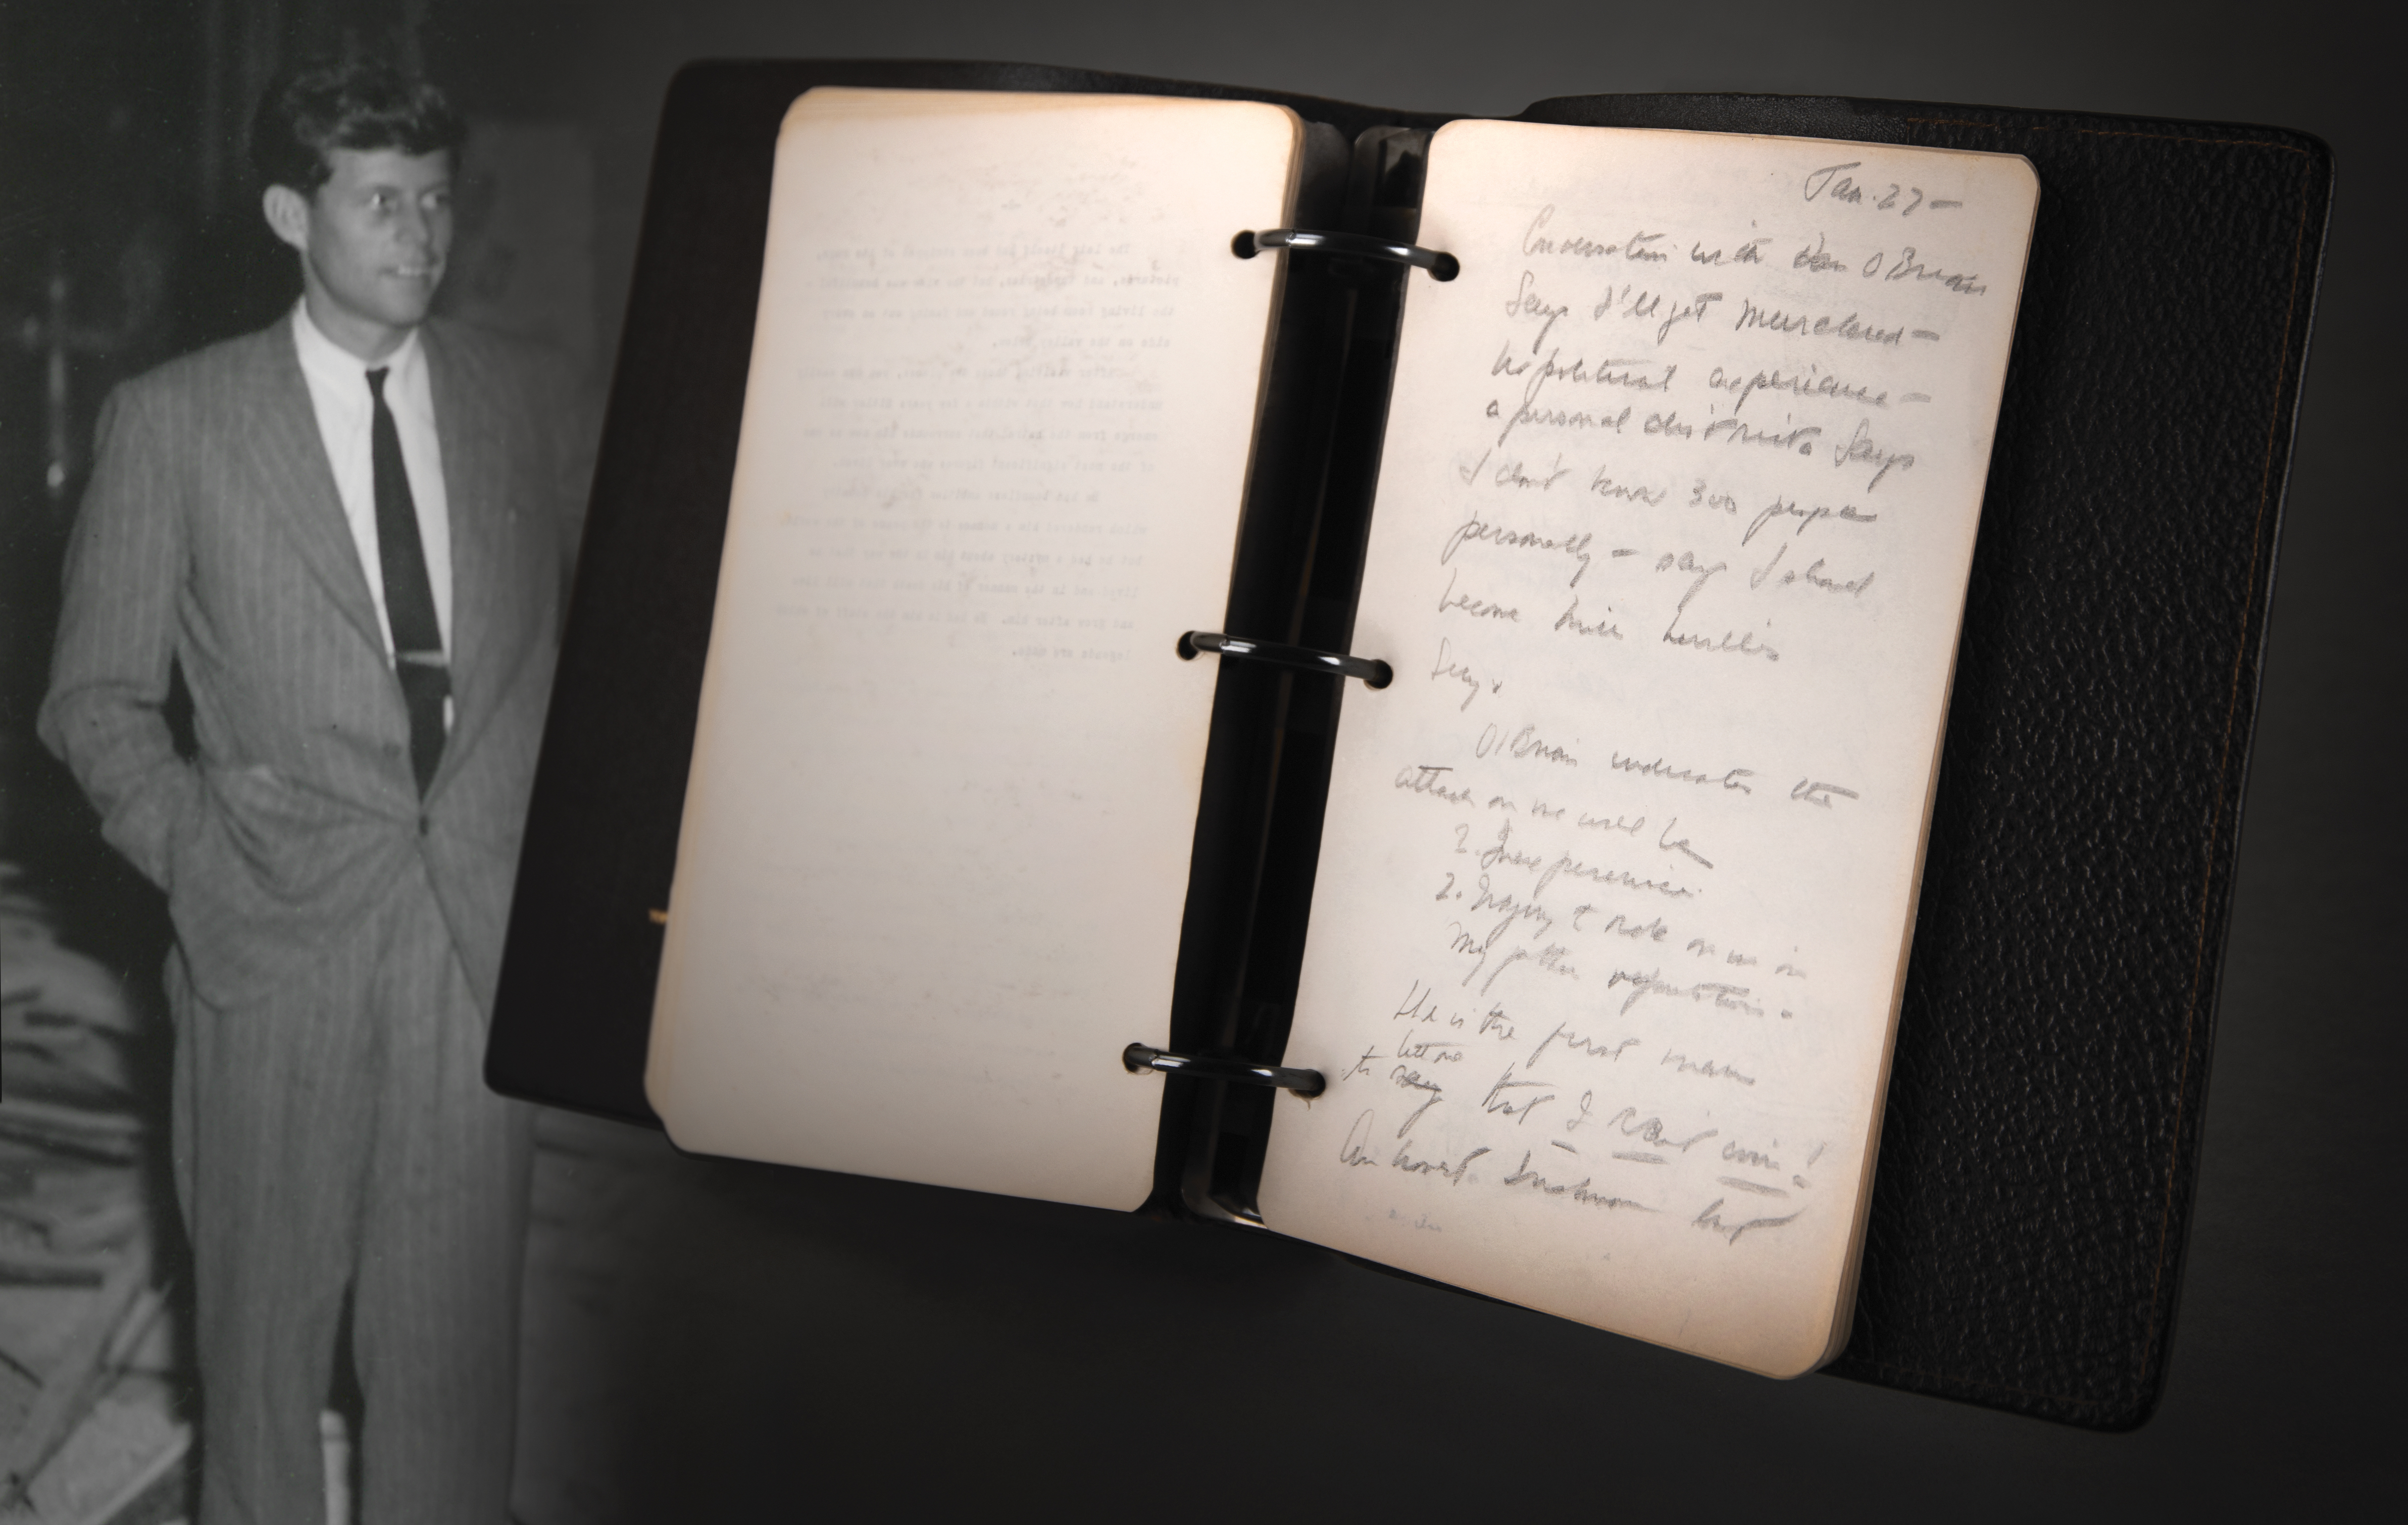 Lot #104 John F. Kennedy's Diary from 1945, with Comments on Hitler, FDR, Politics, and World War II - Image 1